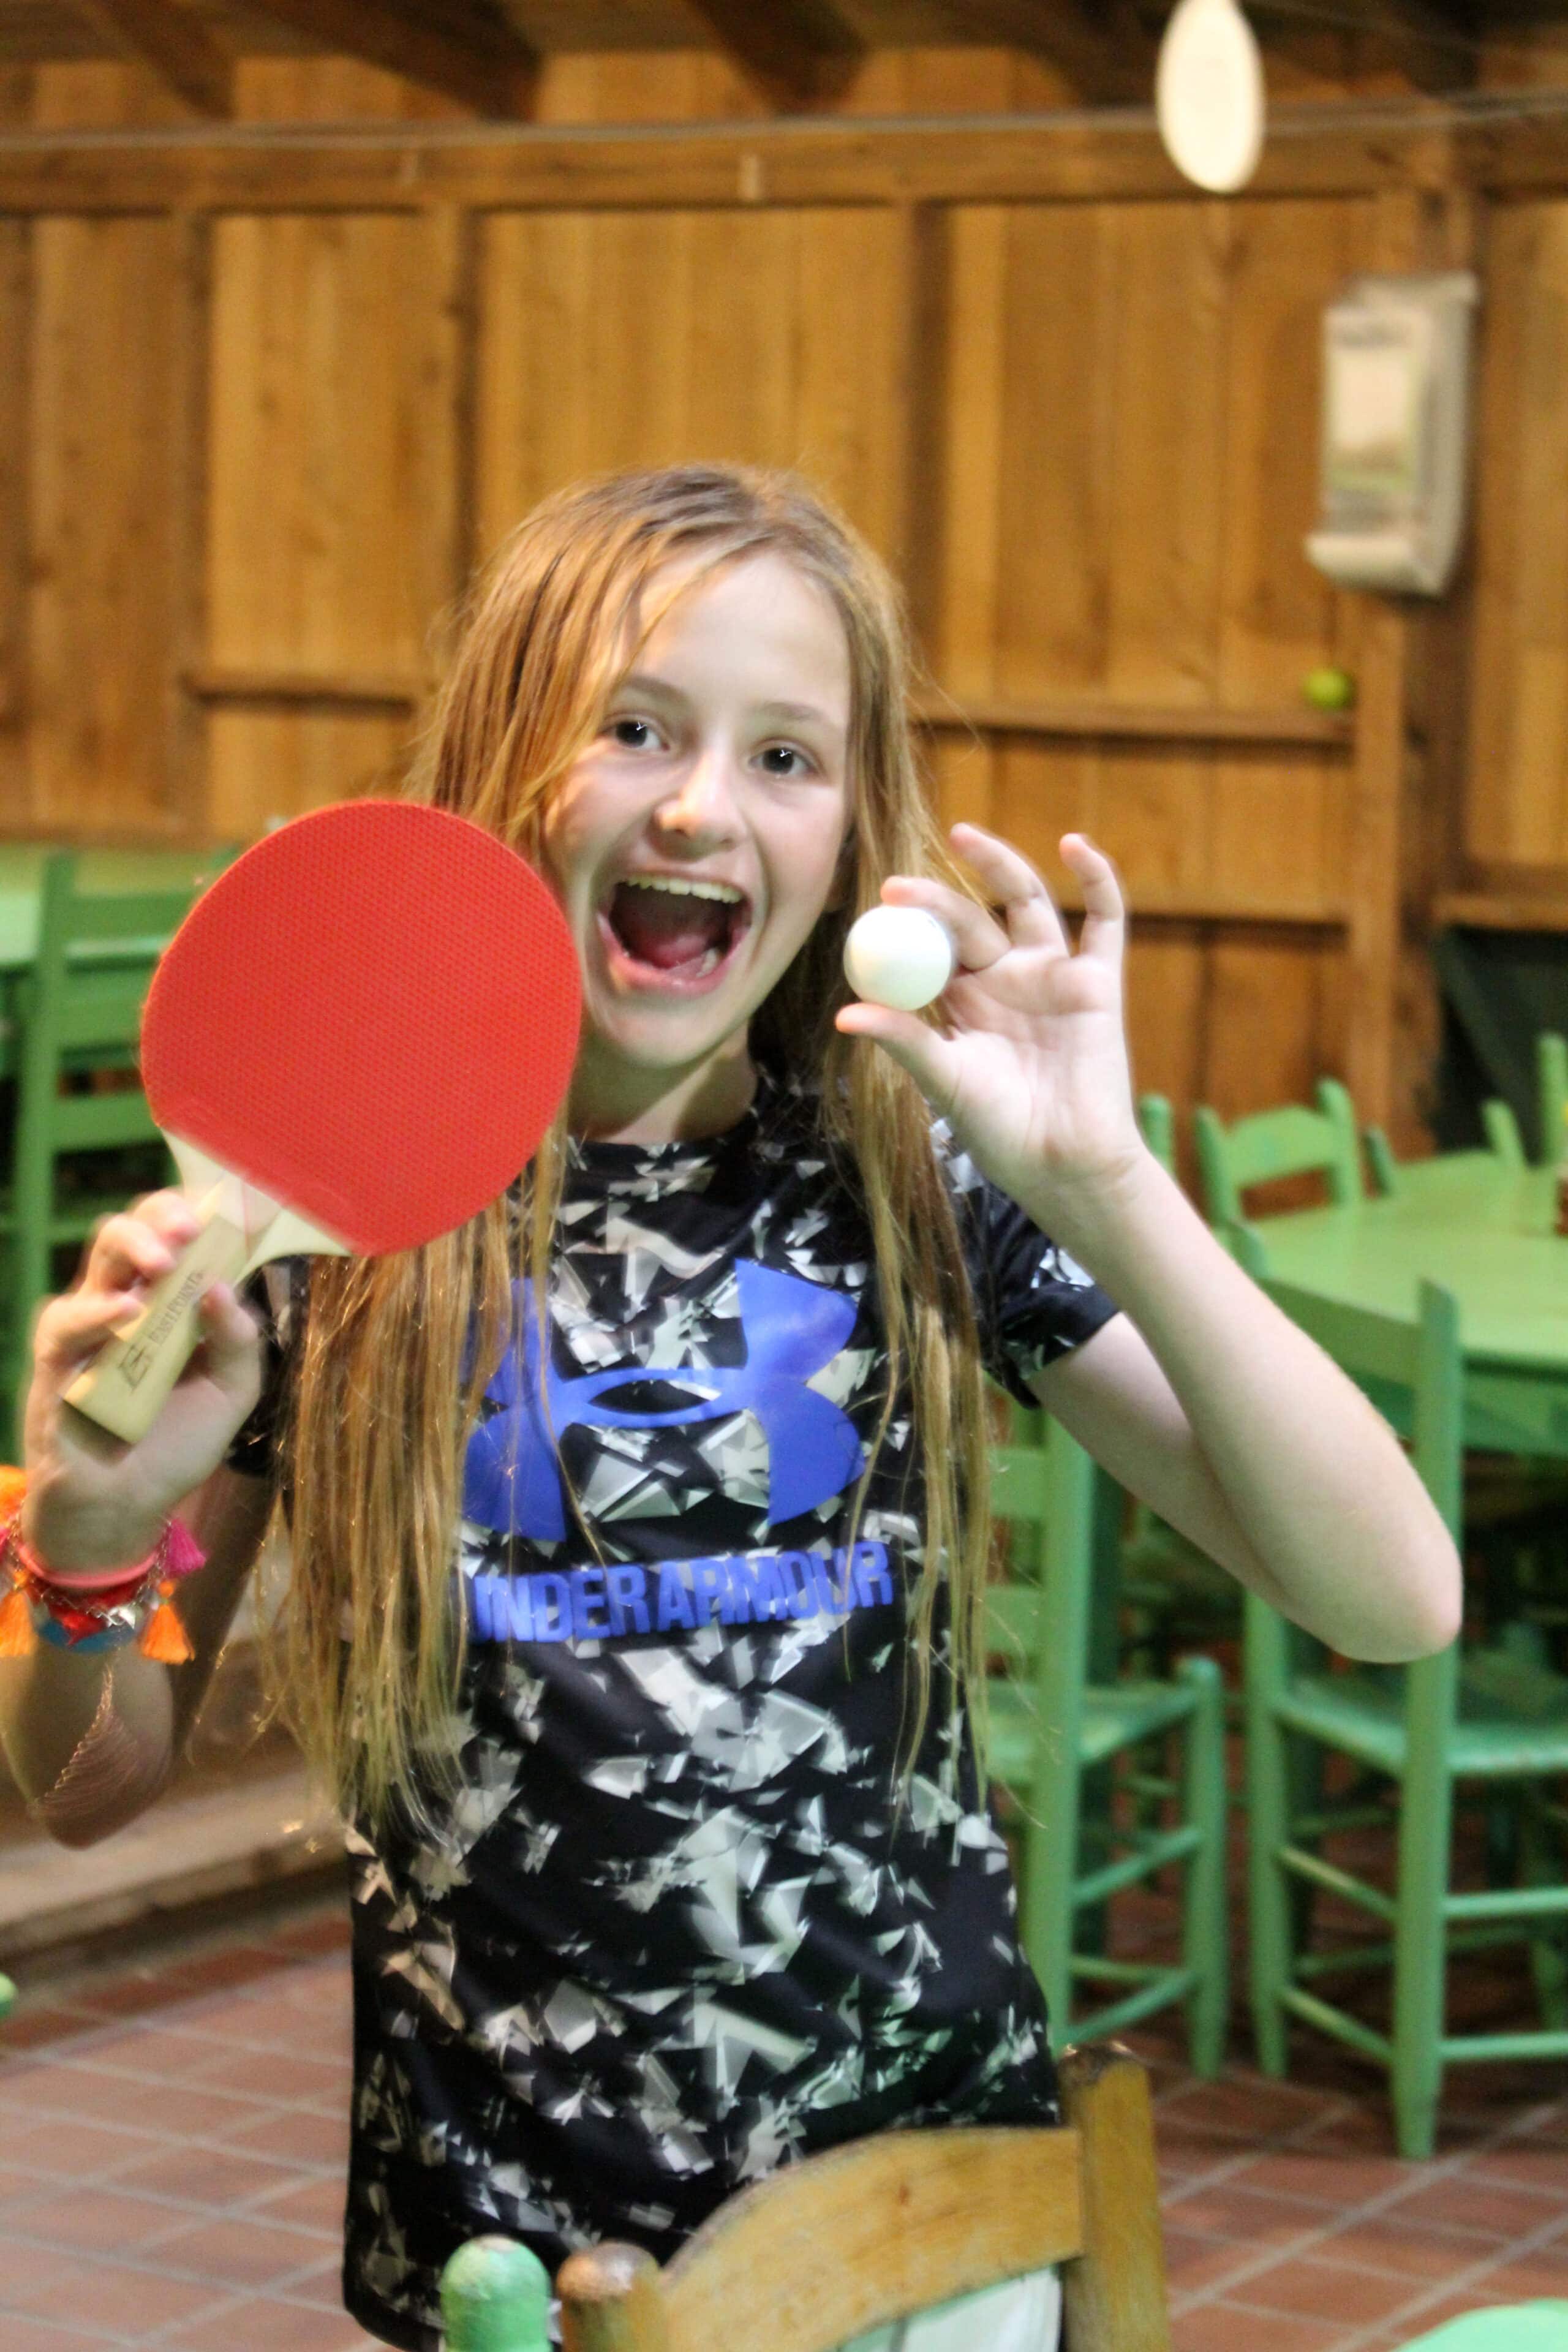 Camp Girl with ping pong paddle and ball